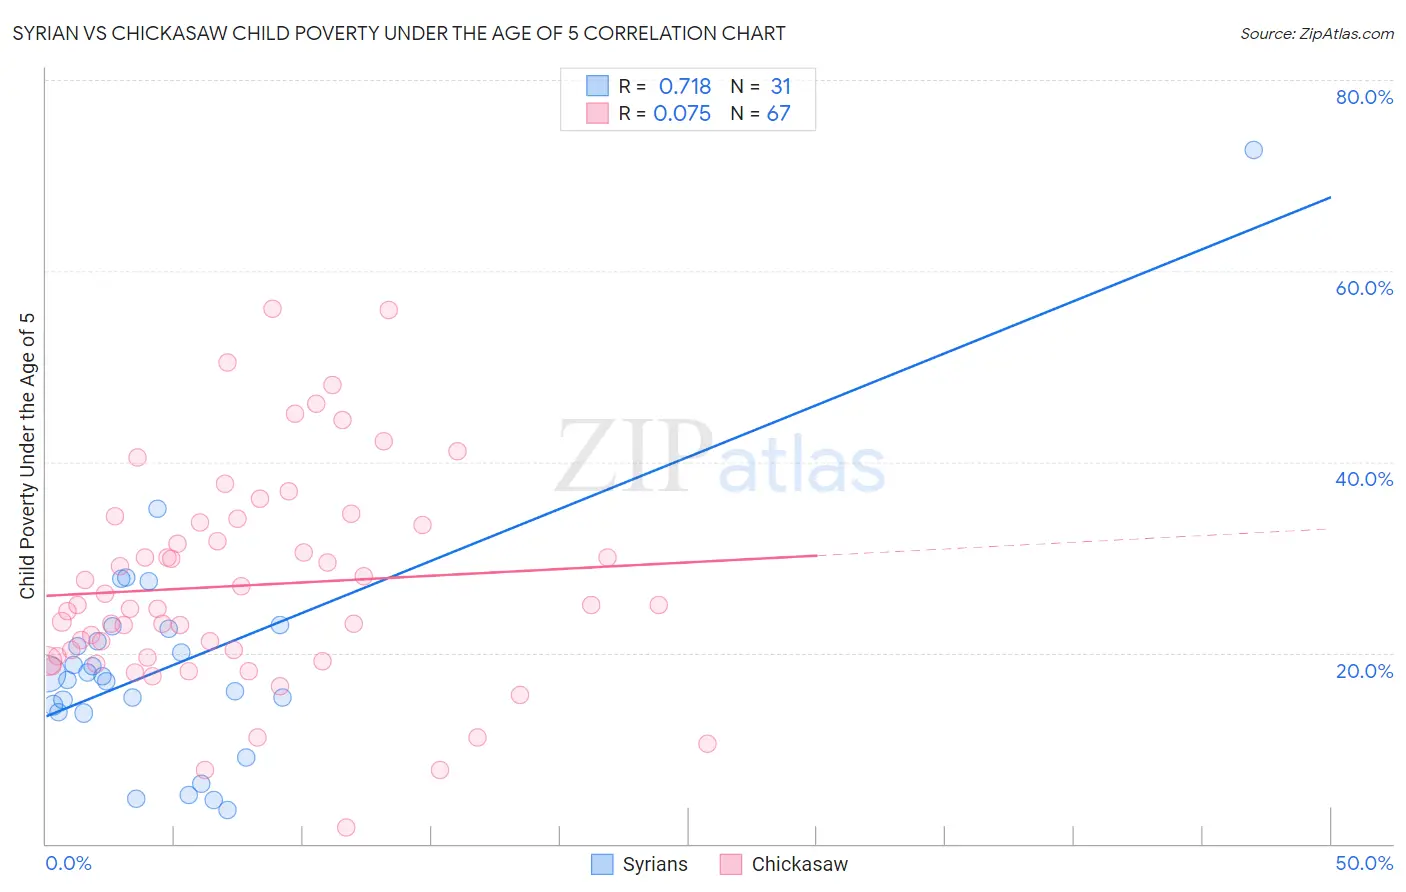 Syrian vs Chickasaw Child Poverty Under the Age of 5